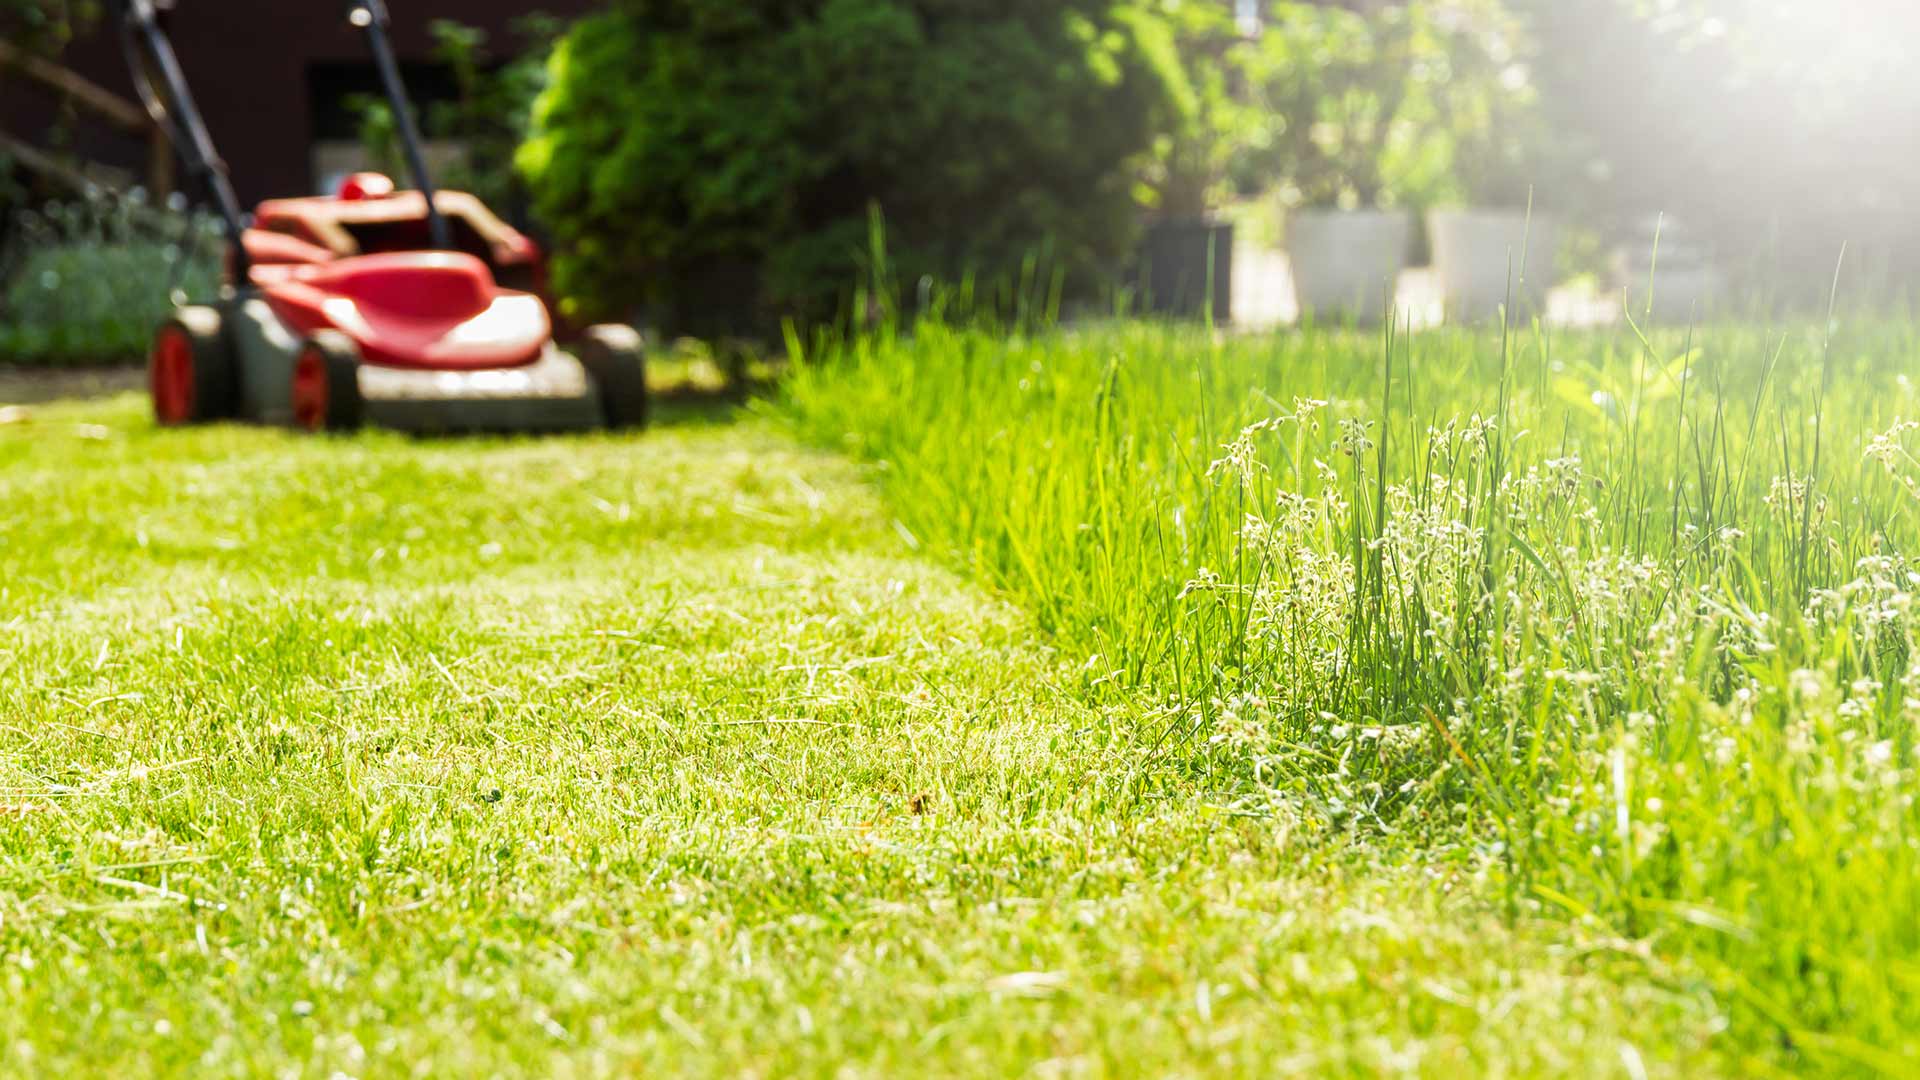 Lawn mowing performed on a Sterling Heights, MI lawn.